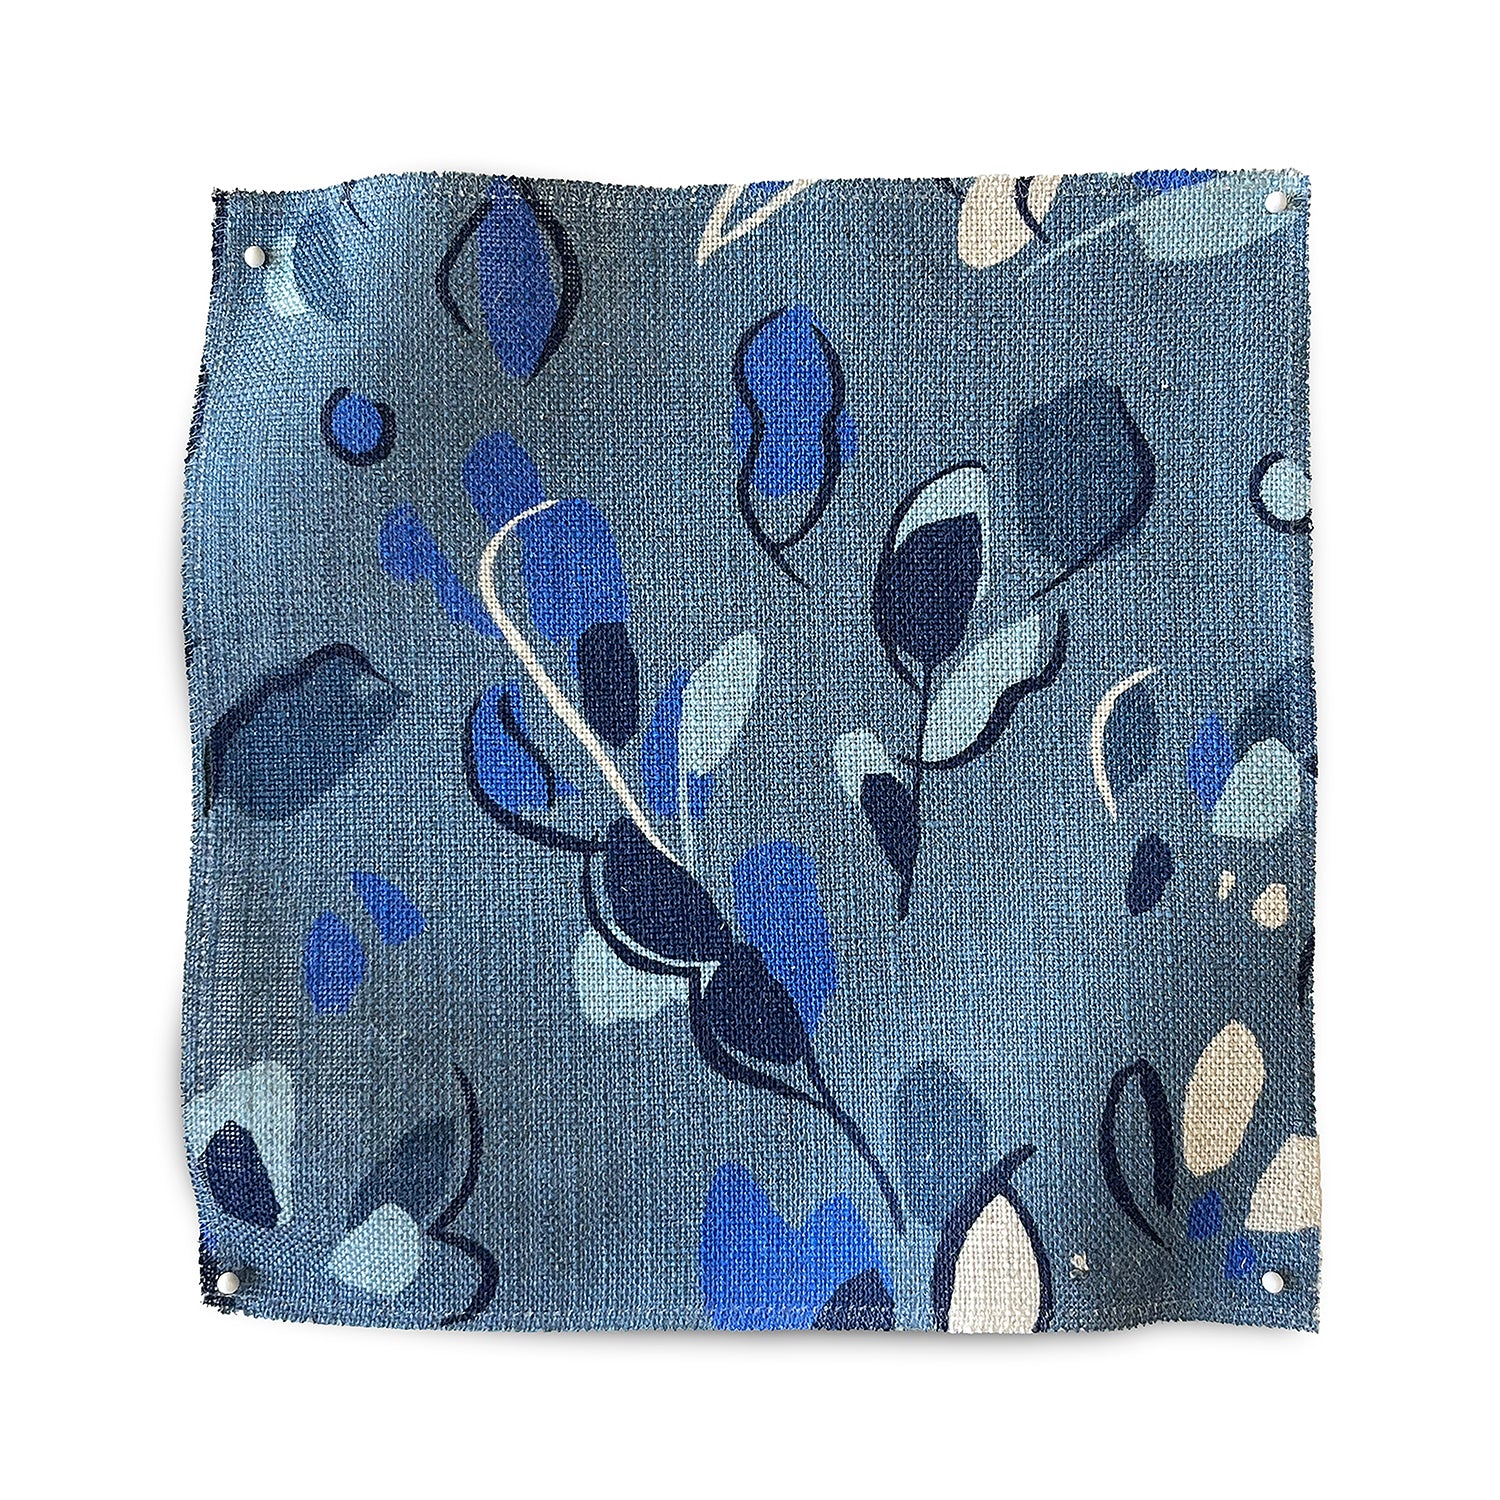 Square fabric swatch in a painterly leaf print in shades of white, blue and navy on a blue field.